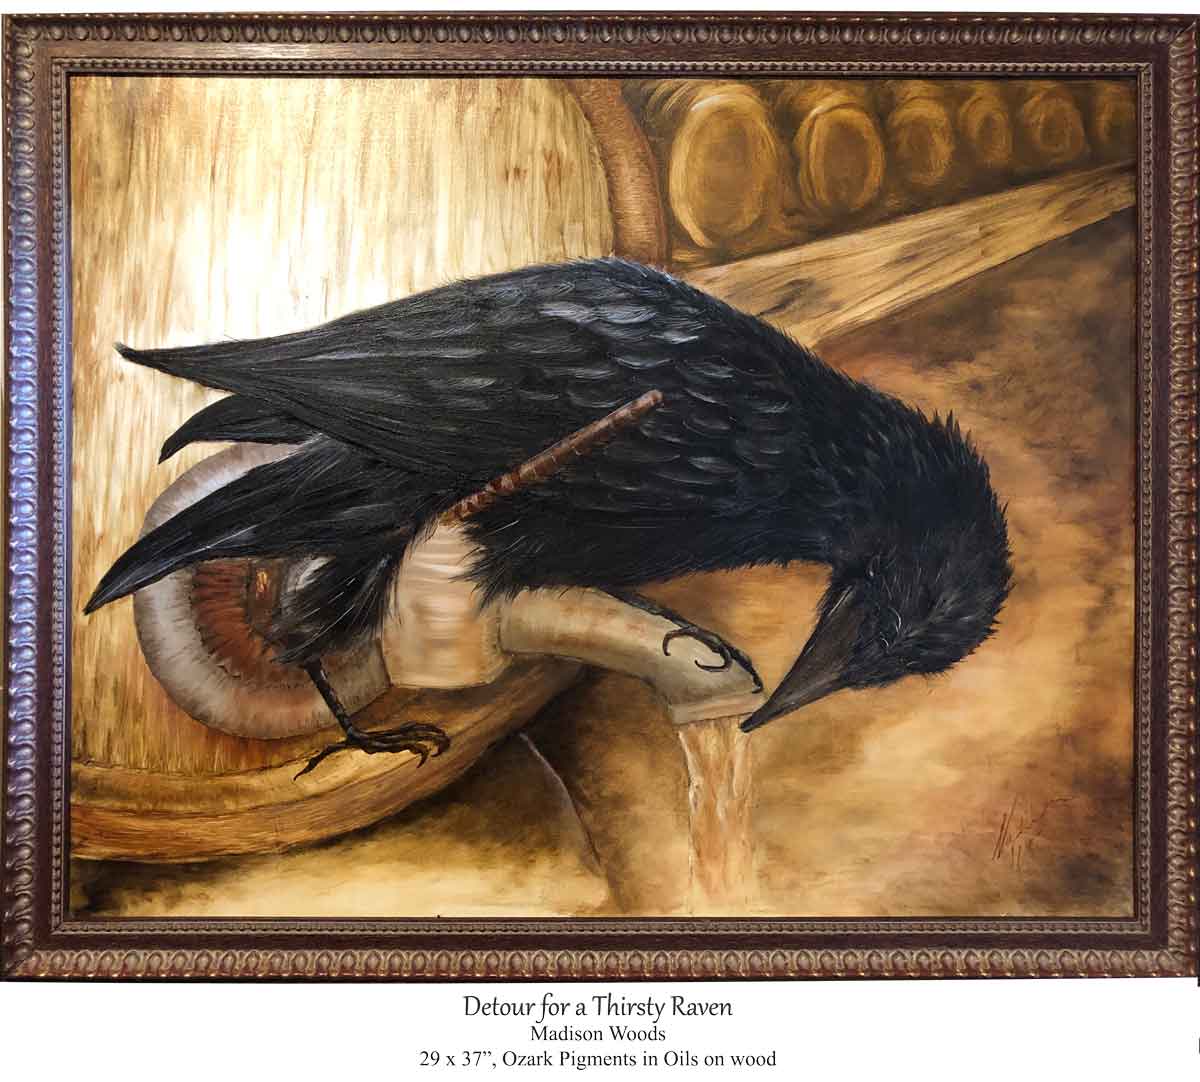 My raven painting in a repurposed frame of excellent quality. This is an example of one creative way of using rocks. Make art!